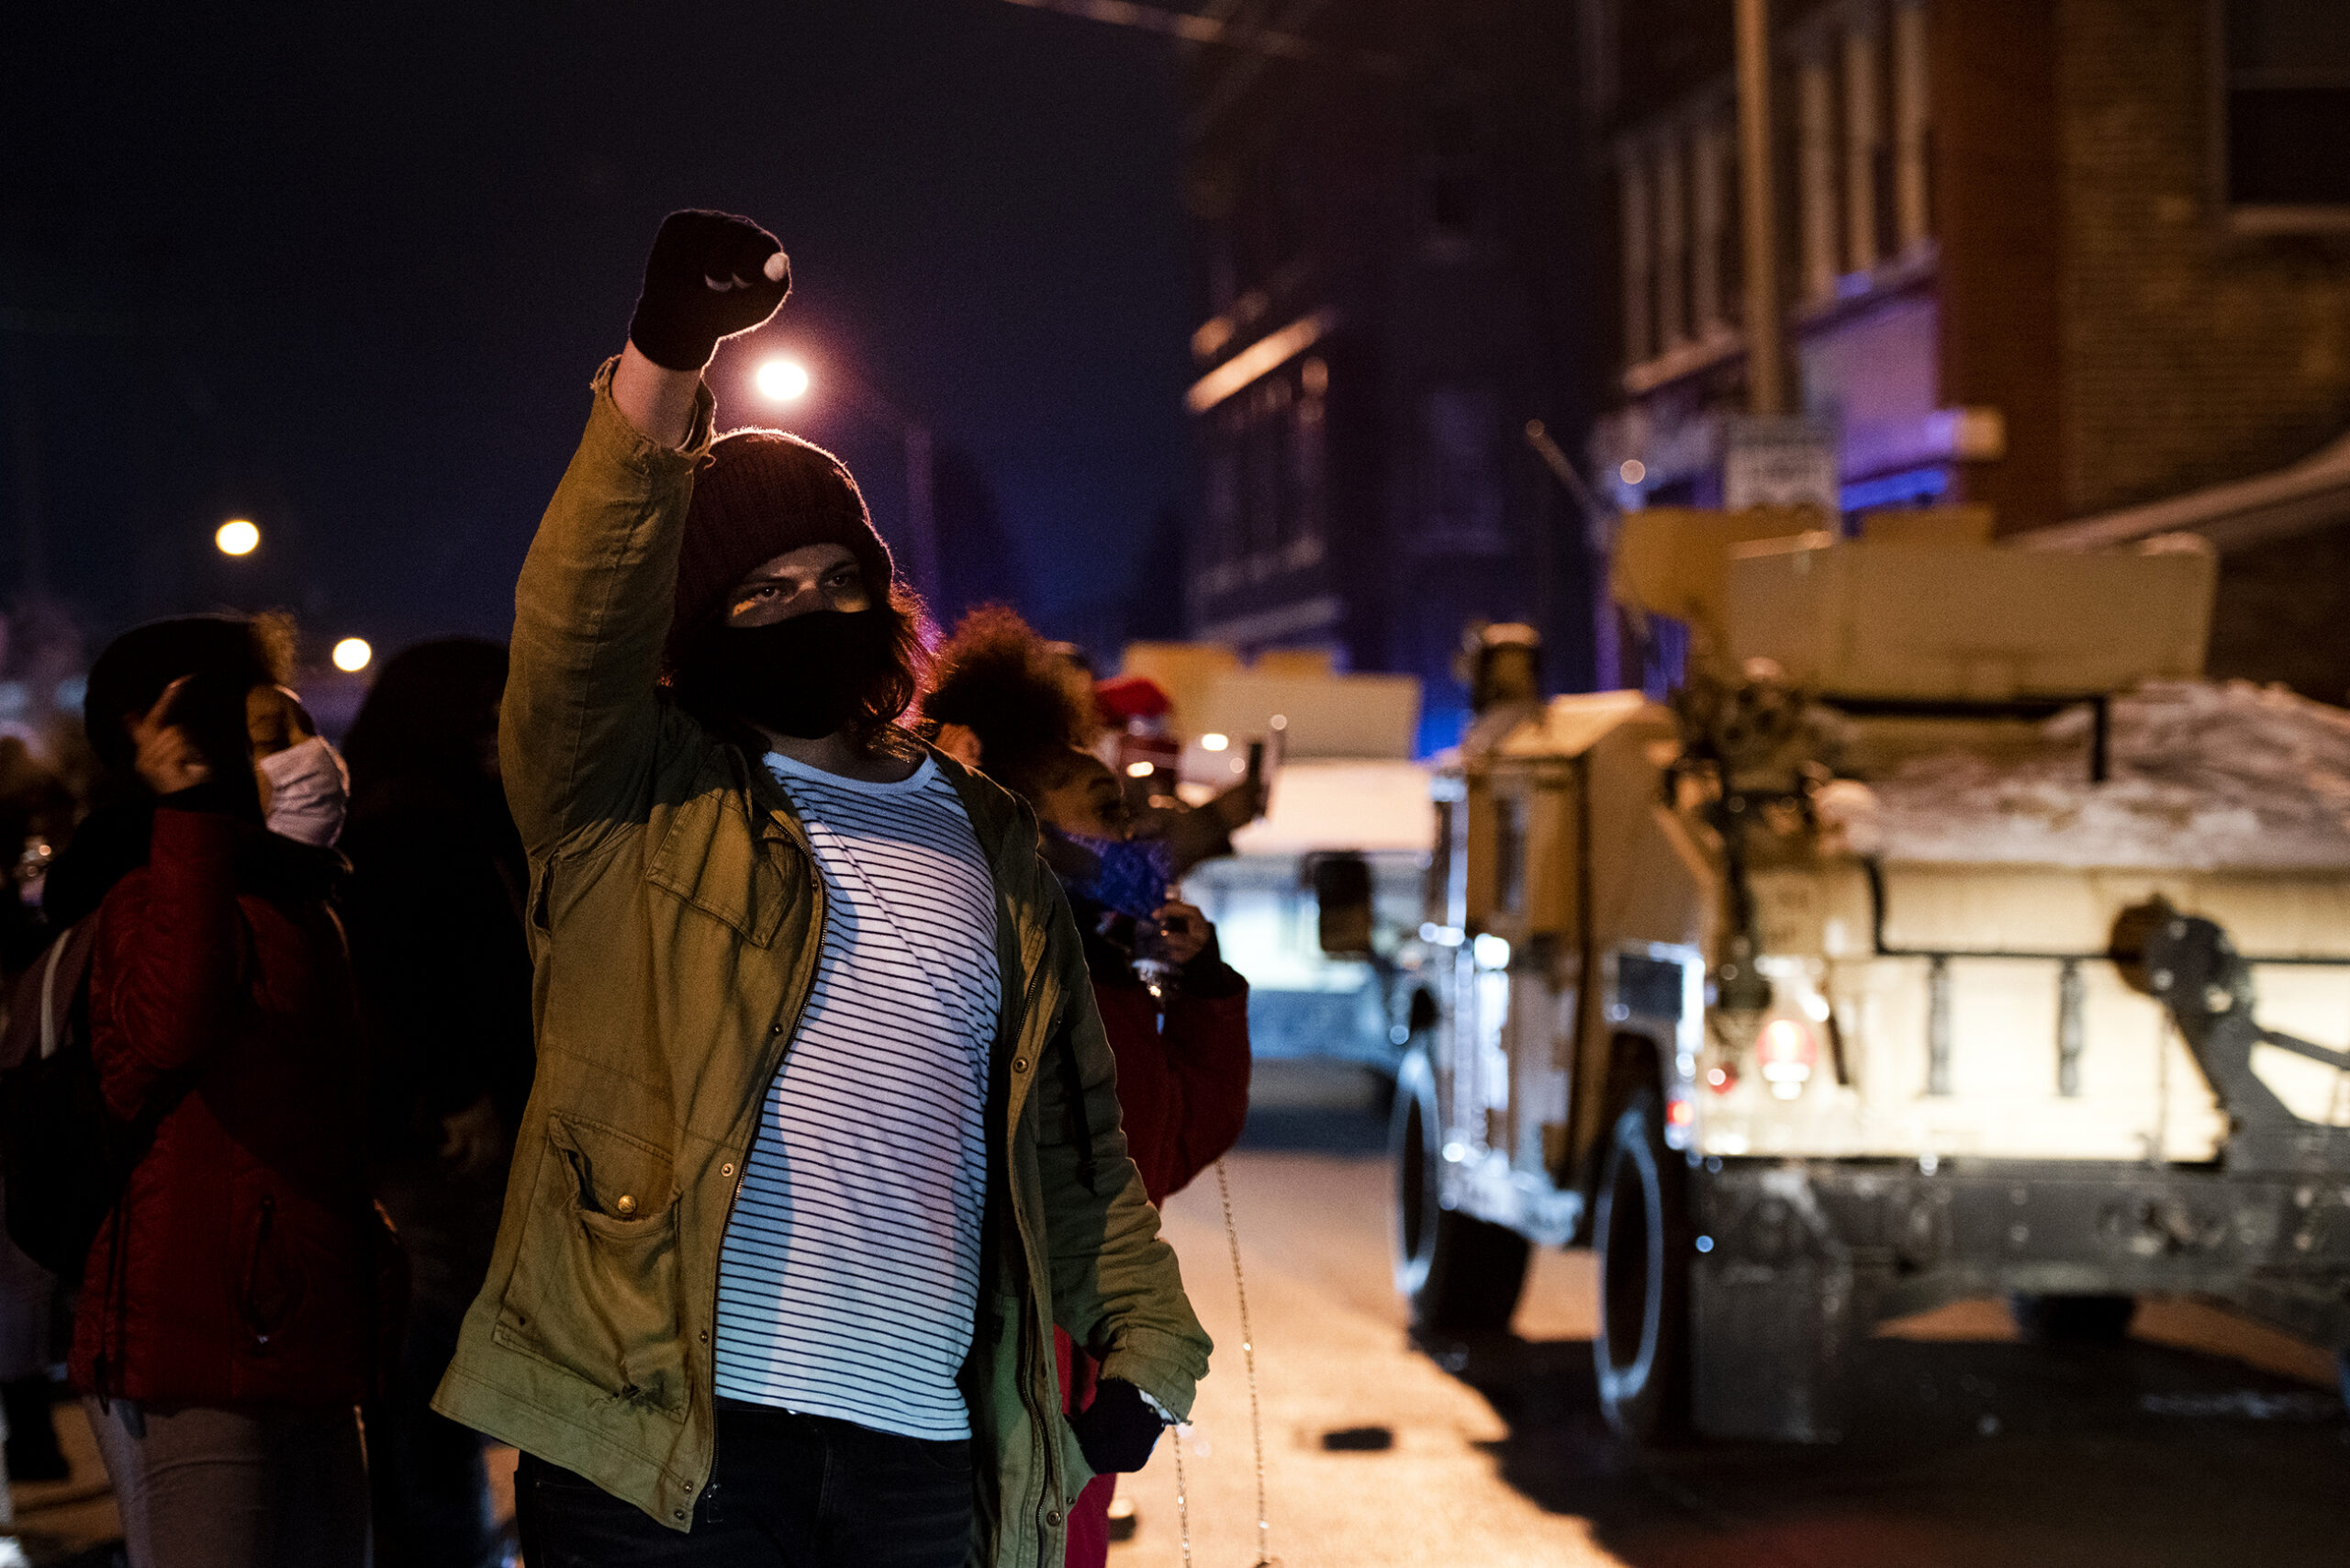 military style vehicles drive by as a protester raises a fist